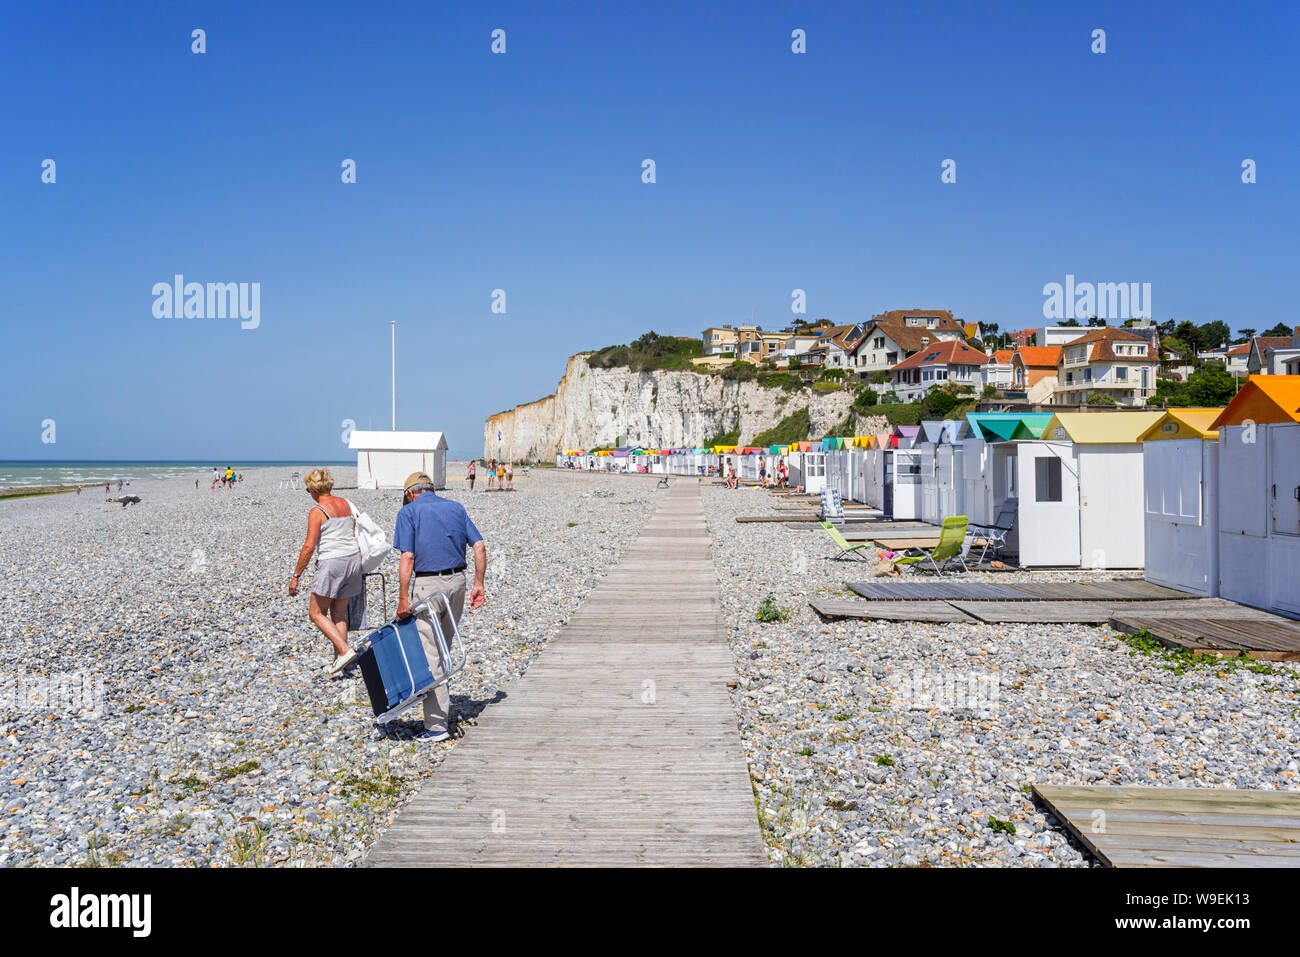 Sunbathers and colourful beach cabins on shingle beach / pebble beach at Criel-sur-Mer in summer, Seine-Maritime, Normandy, France Stock Photo